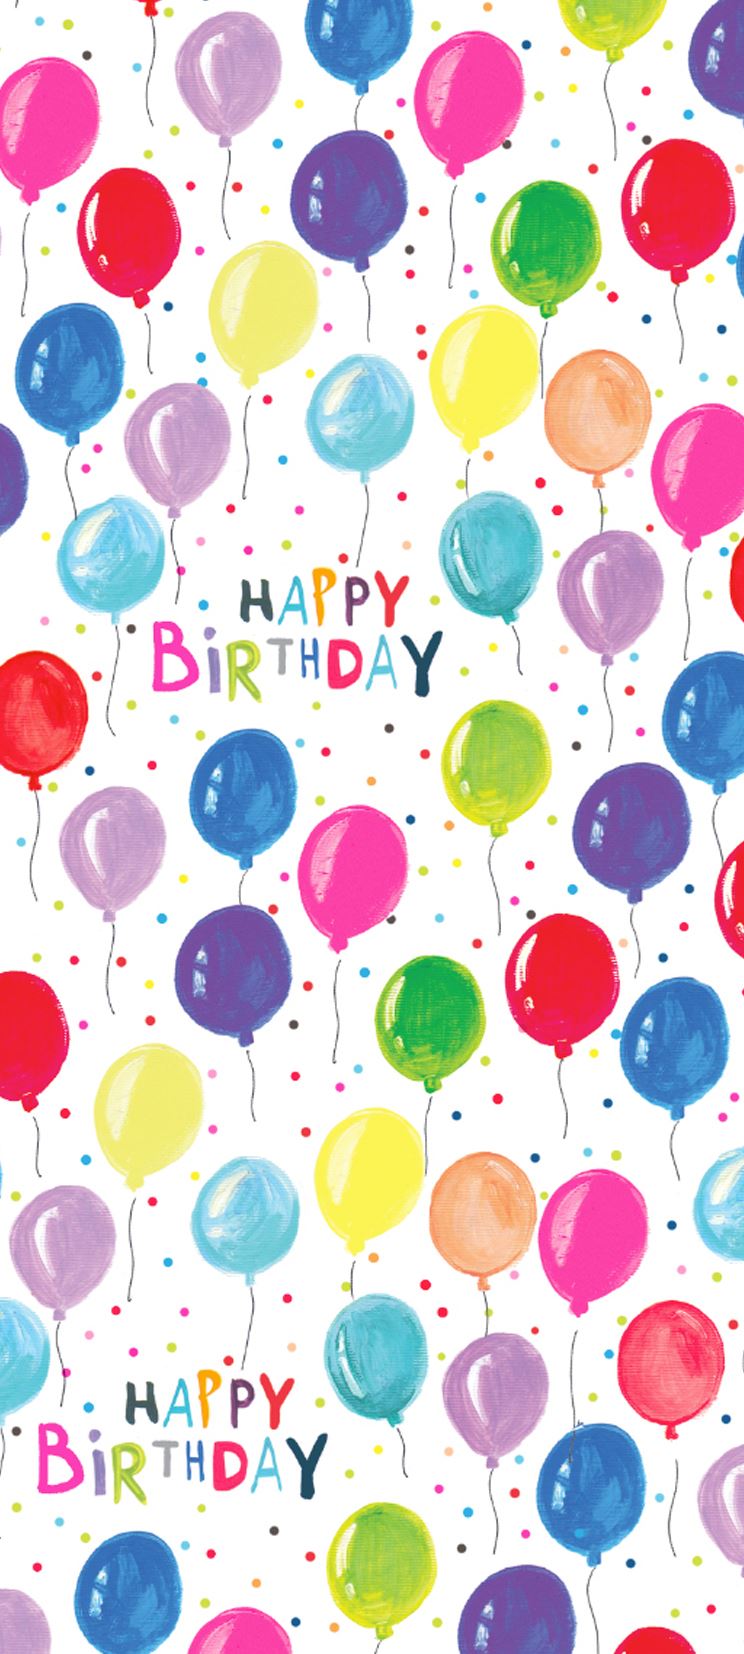 A rectangular sheet of tissue paper with a white background covered in a rainbow of coloured balloons with strings dangling. The white background also has some multicoloured spots embellishing it and the words Happy Birthday in a haphazard type.